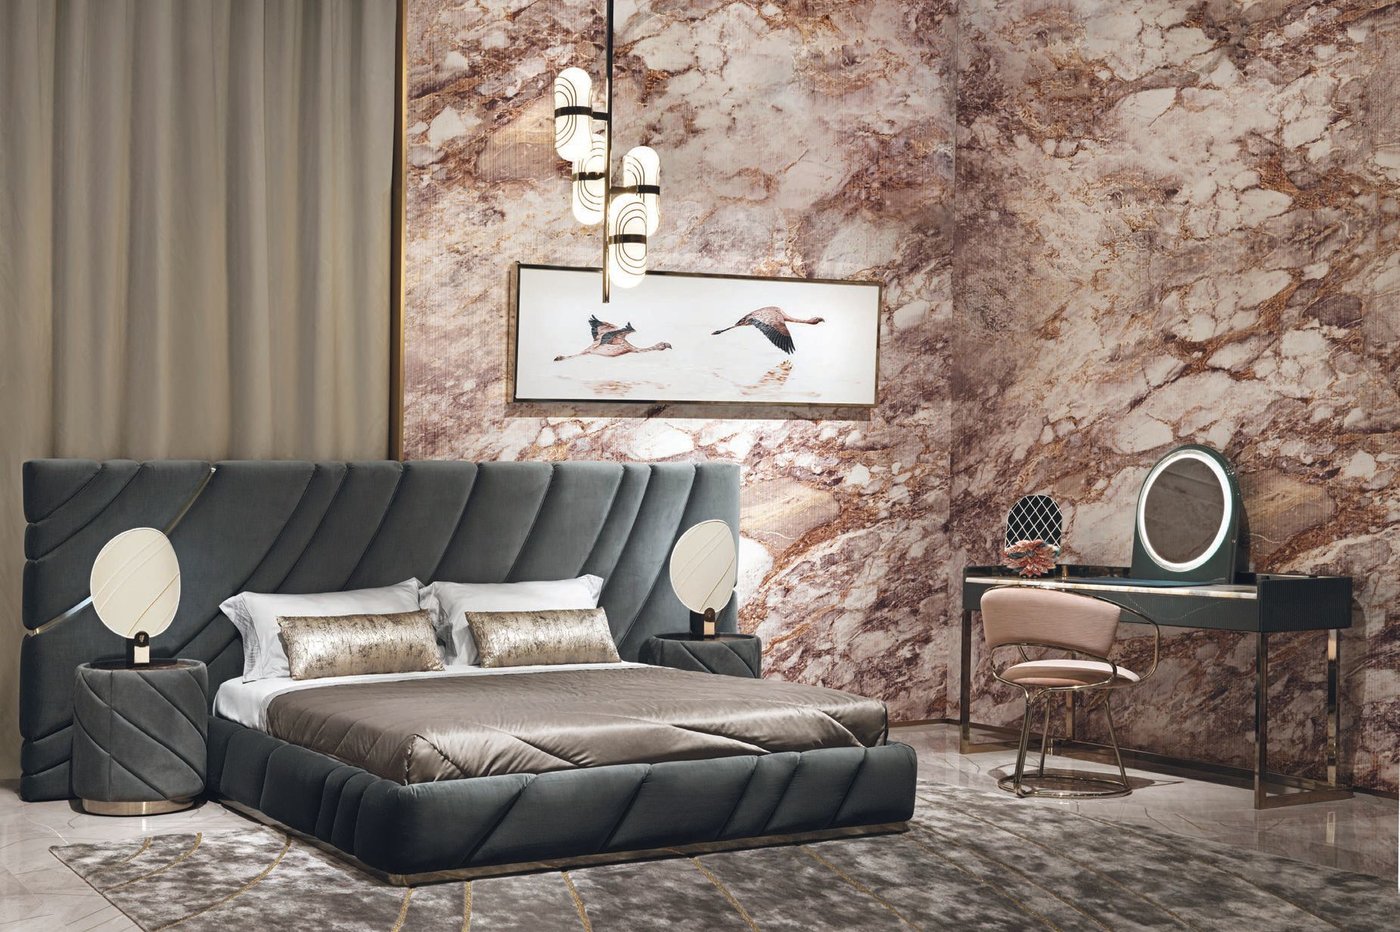 Part of Visionnaire’s Beauty collection featuring 60 product families, Alessandro La Spada designed the Ultrasound room featuring a variety of materials like plush velvet, wood, steel and marble. PHOTOGRAPHED BY MAX ZAMBELLI